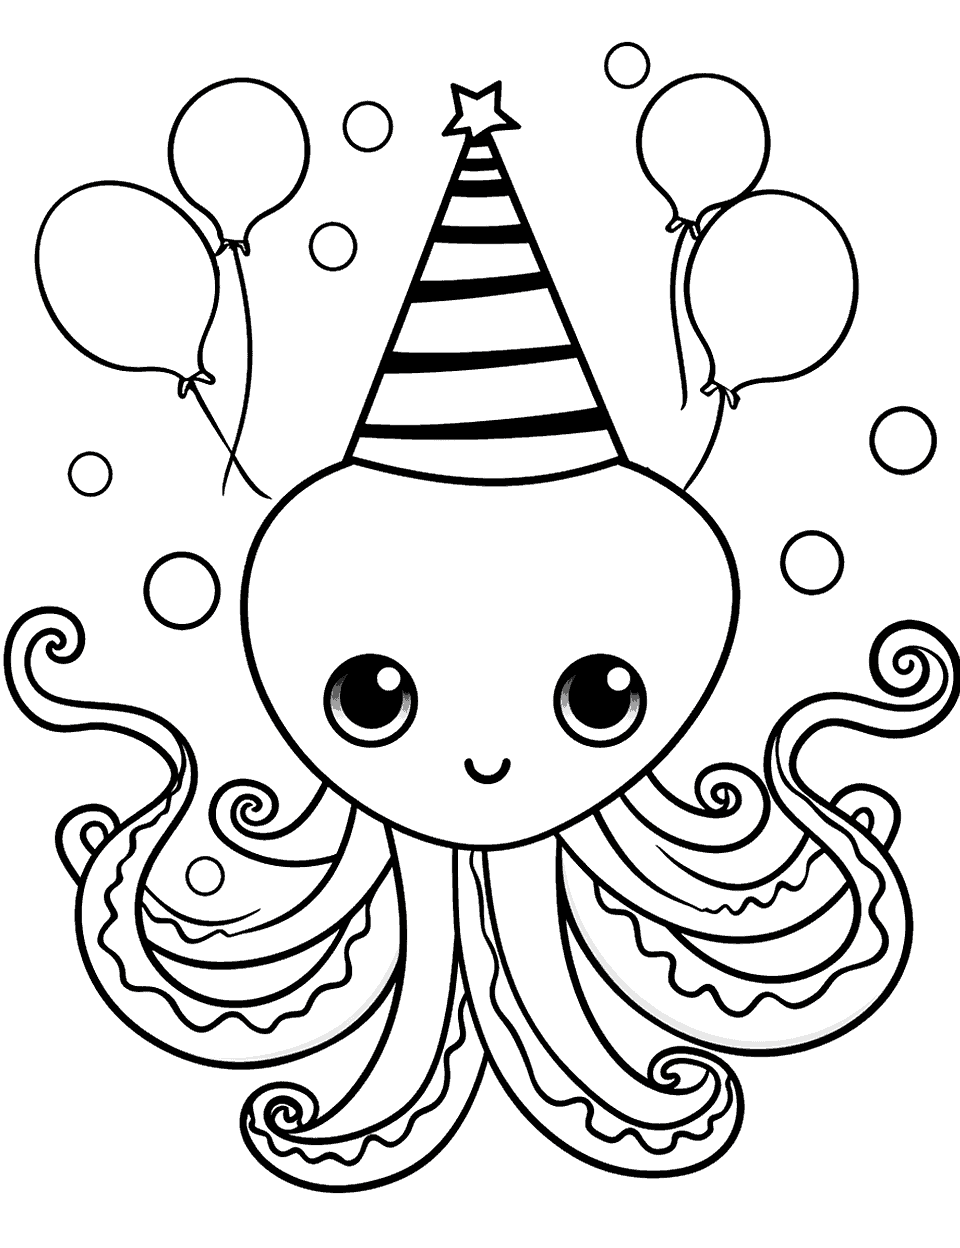 Cute Octopus in a Party Hat Coloring Page - An adorable octopus wearing a colorful party hat and surrounded by balloons.